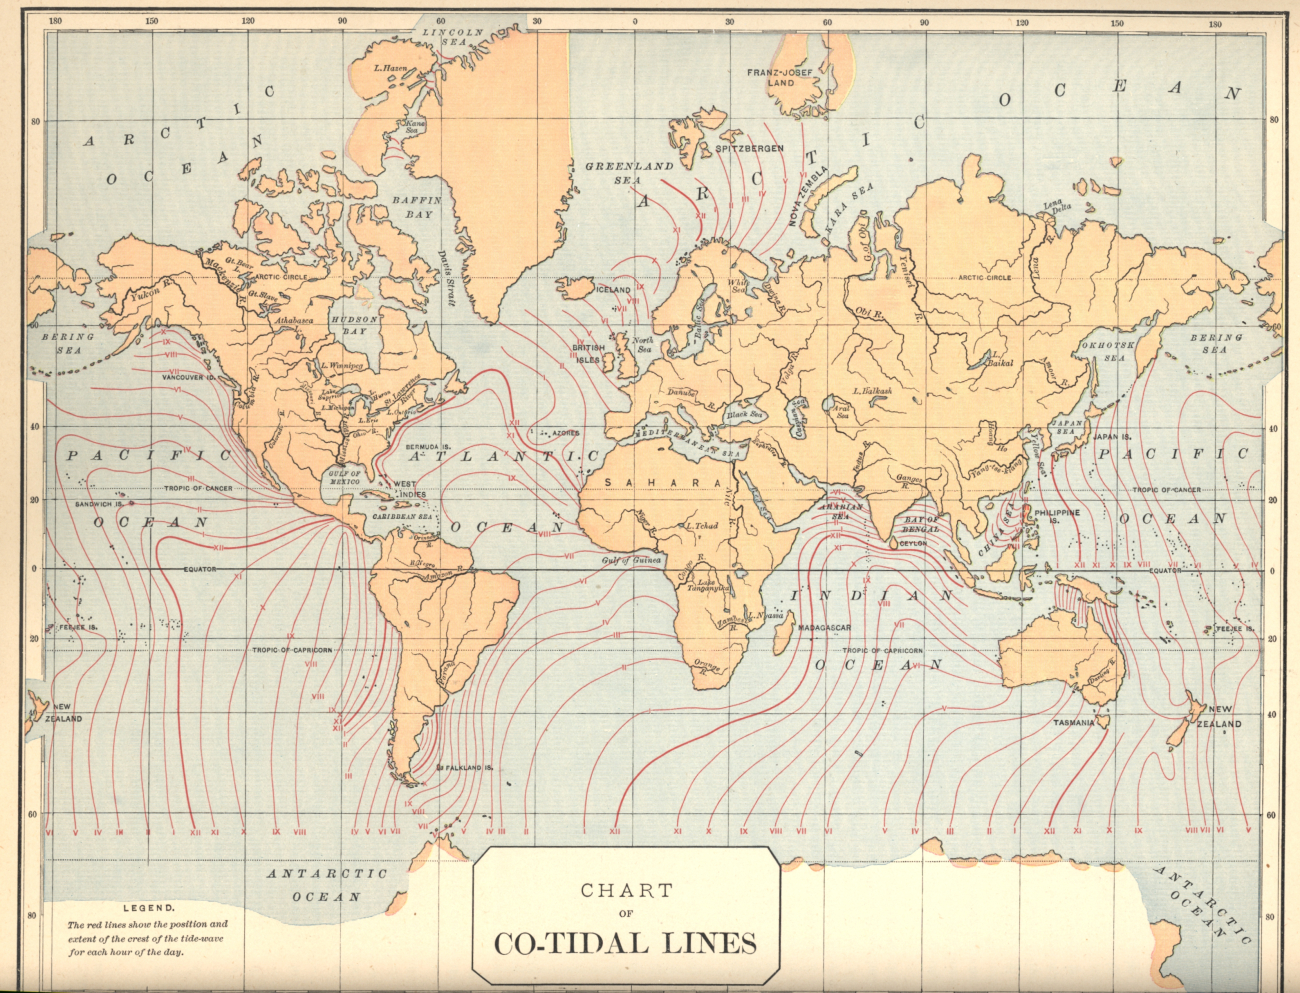 Co-tidal Lines of the World as shown in Butler's Physical Geography, byby Jacques Wardlaw Redway, 1887